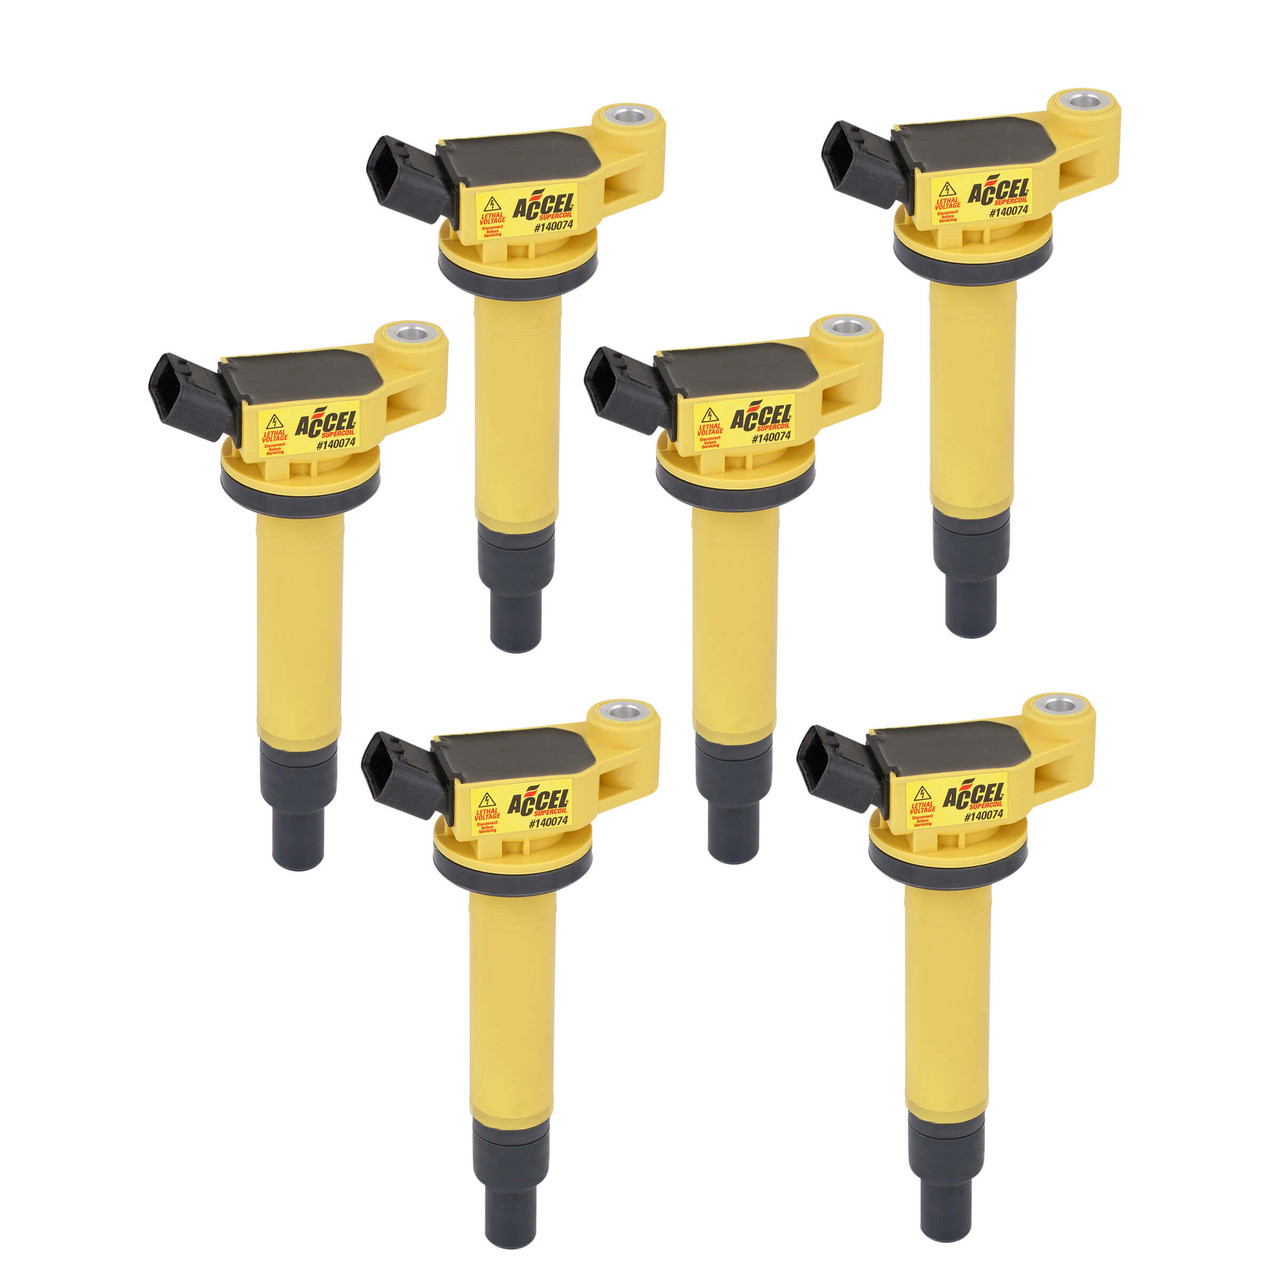 140074-6 Accel Ignition Coil - SuperCoil - Toyota 3.0L - V6 - 6-Pack